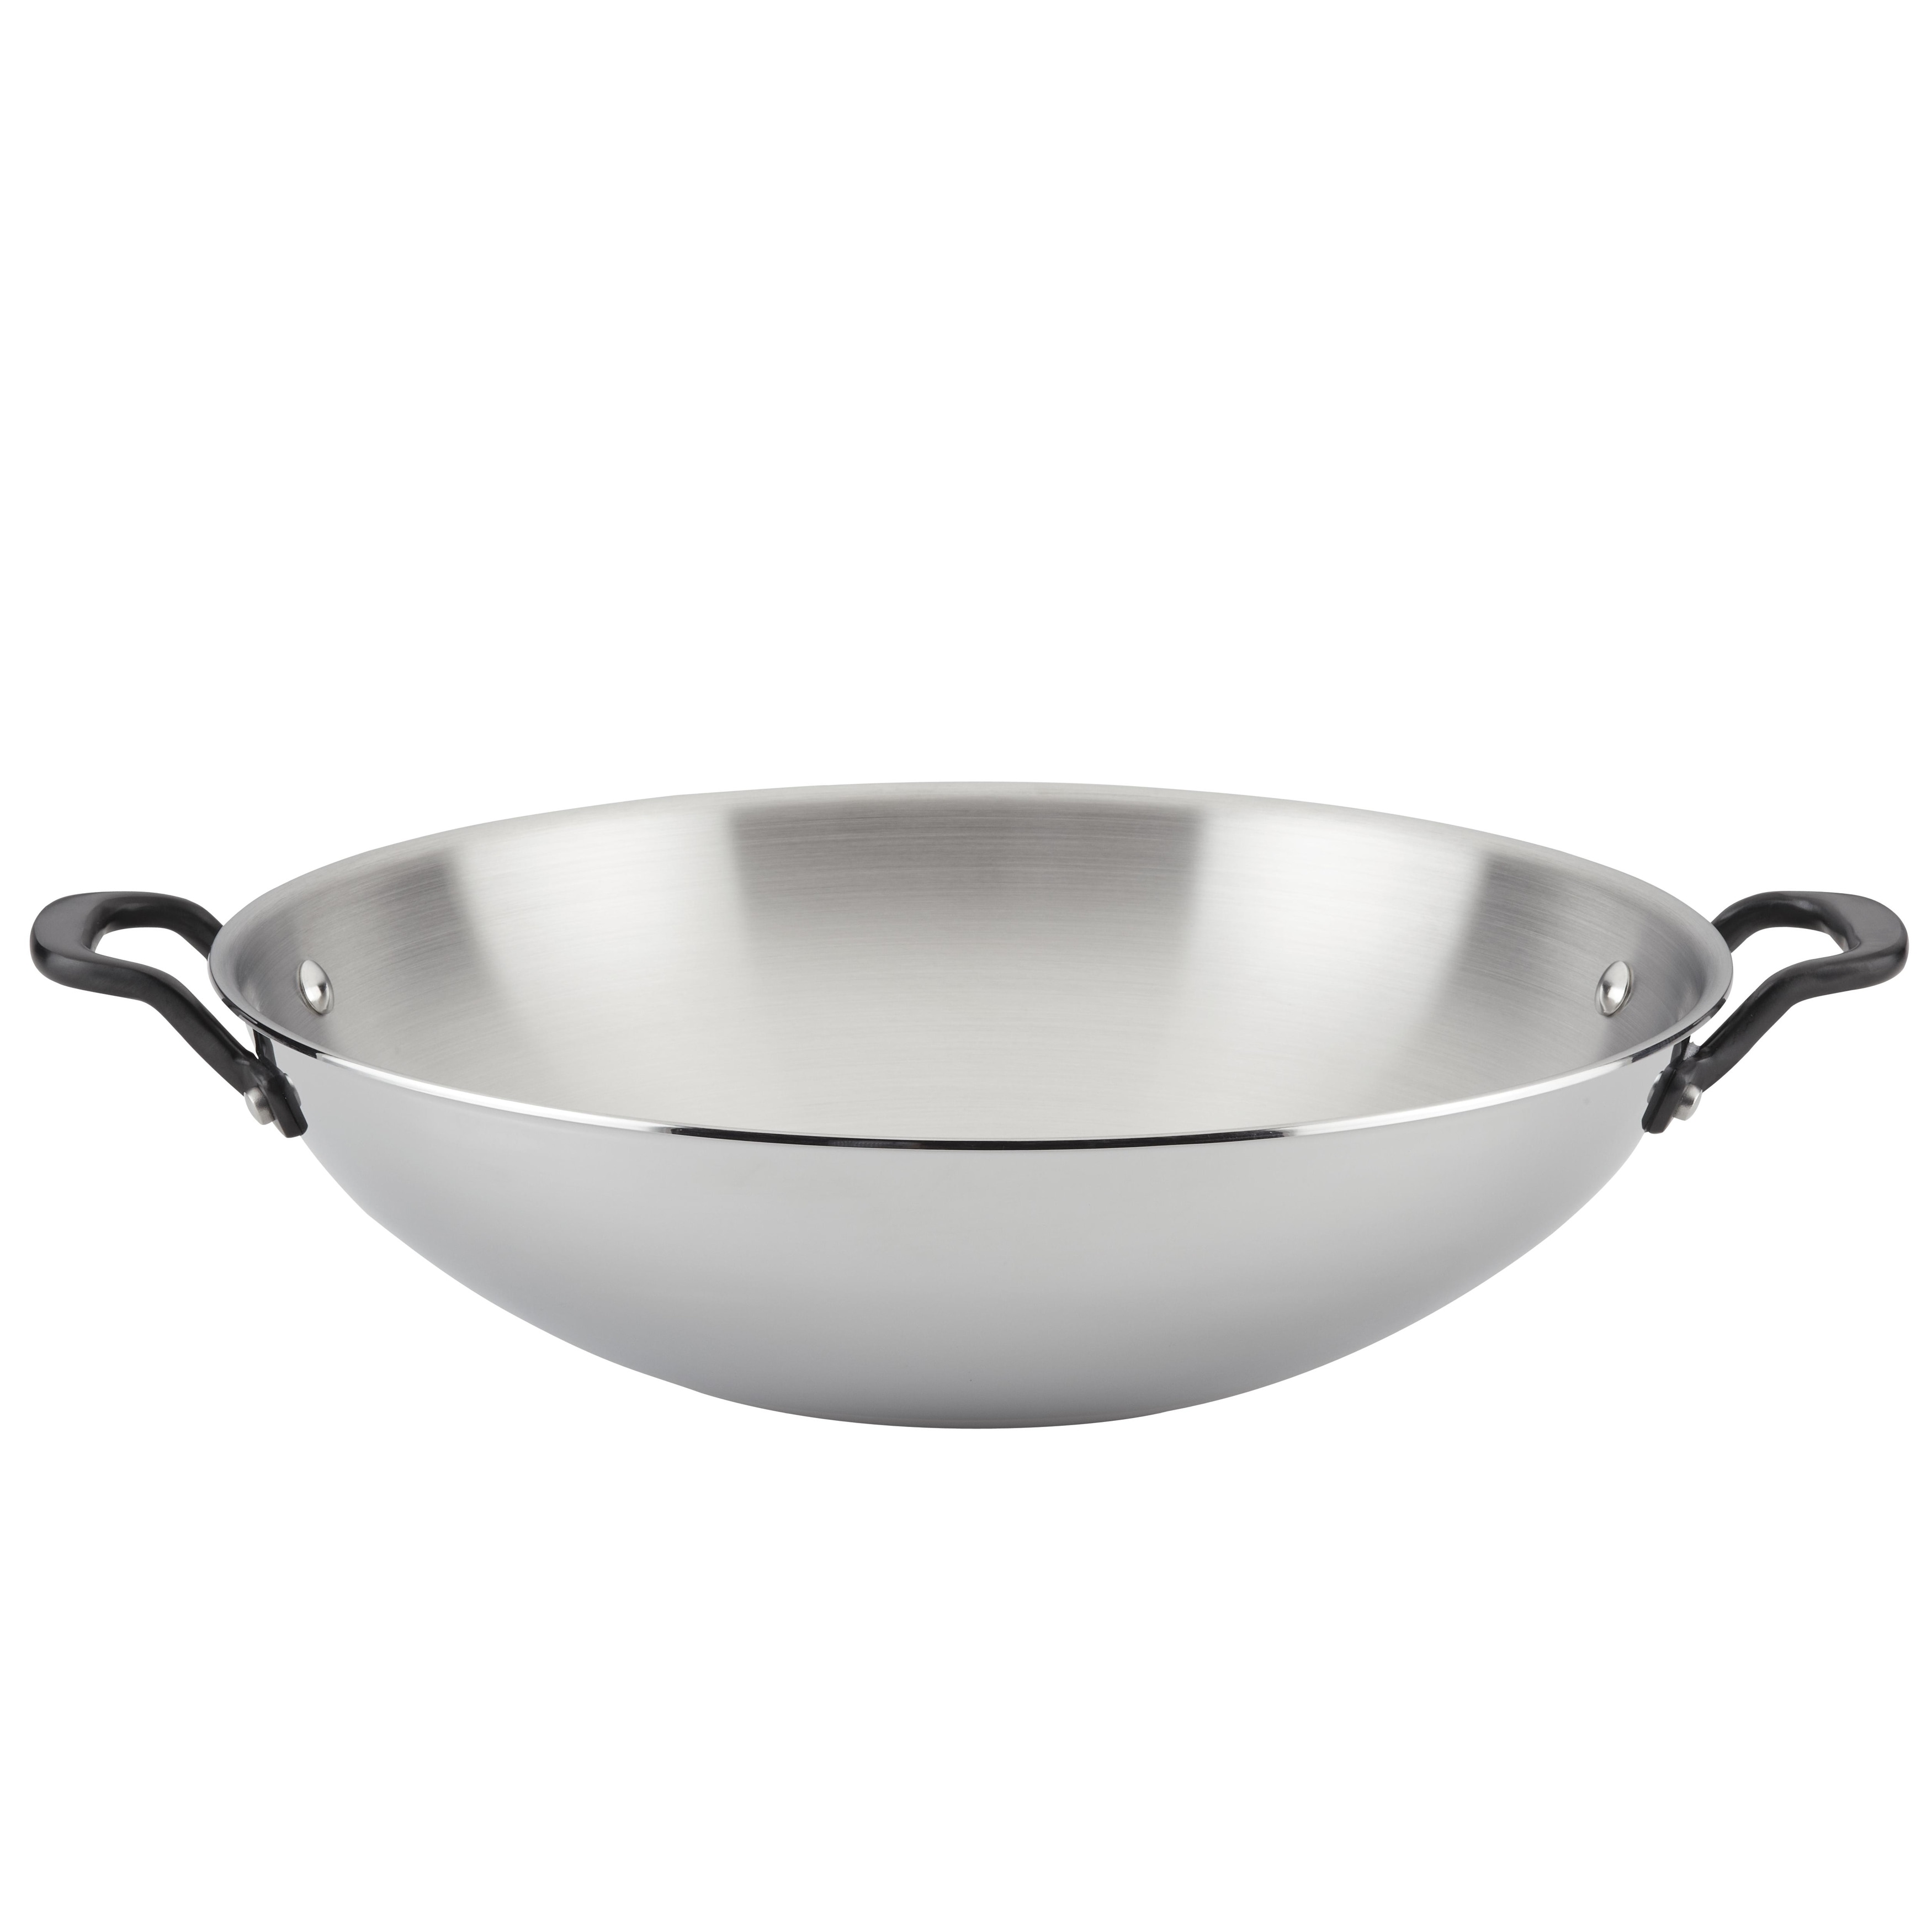 https://ak1.ostkcdn.com/images/products/is/images/direct/265d5bbae837ac804a9247a3d0bb75a8b8bbca85/KitchenAid-5-Ply-Clad-Stainless-Steel-Wok%2C-15in.jpg